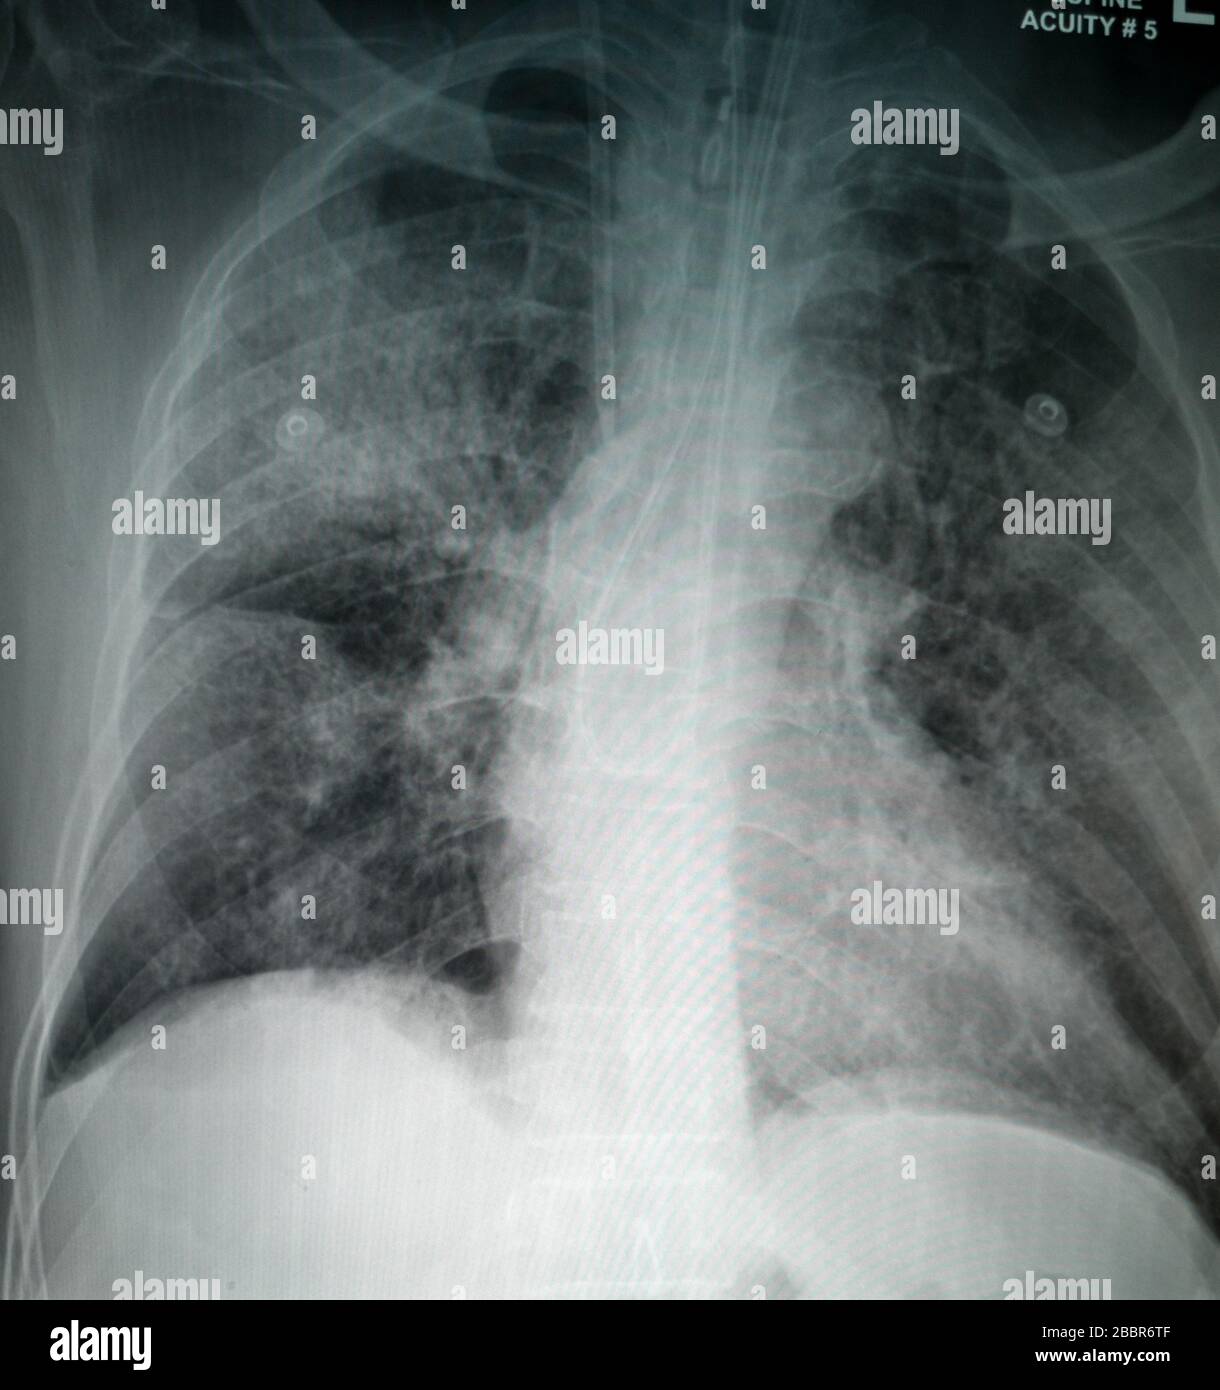 Chest X-Ray of suspected Corona virus patient high quality image showing changes in the lung due to Covid-19 virus with chest tube Stock Photo